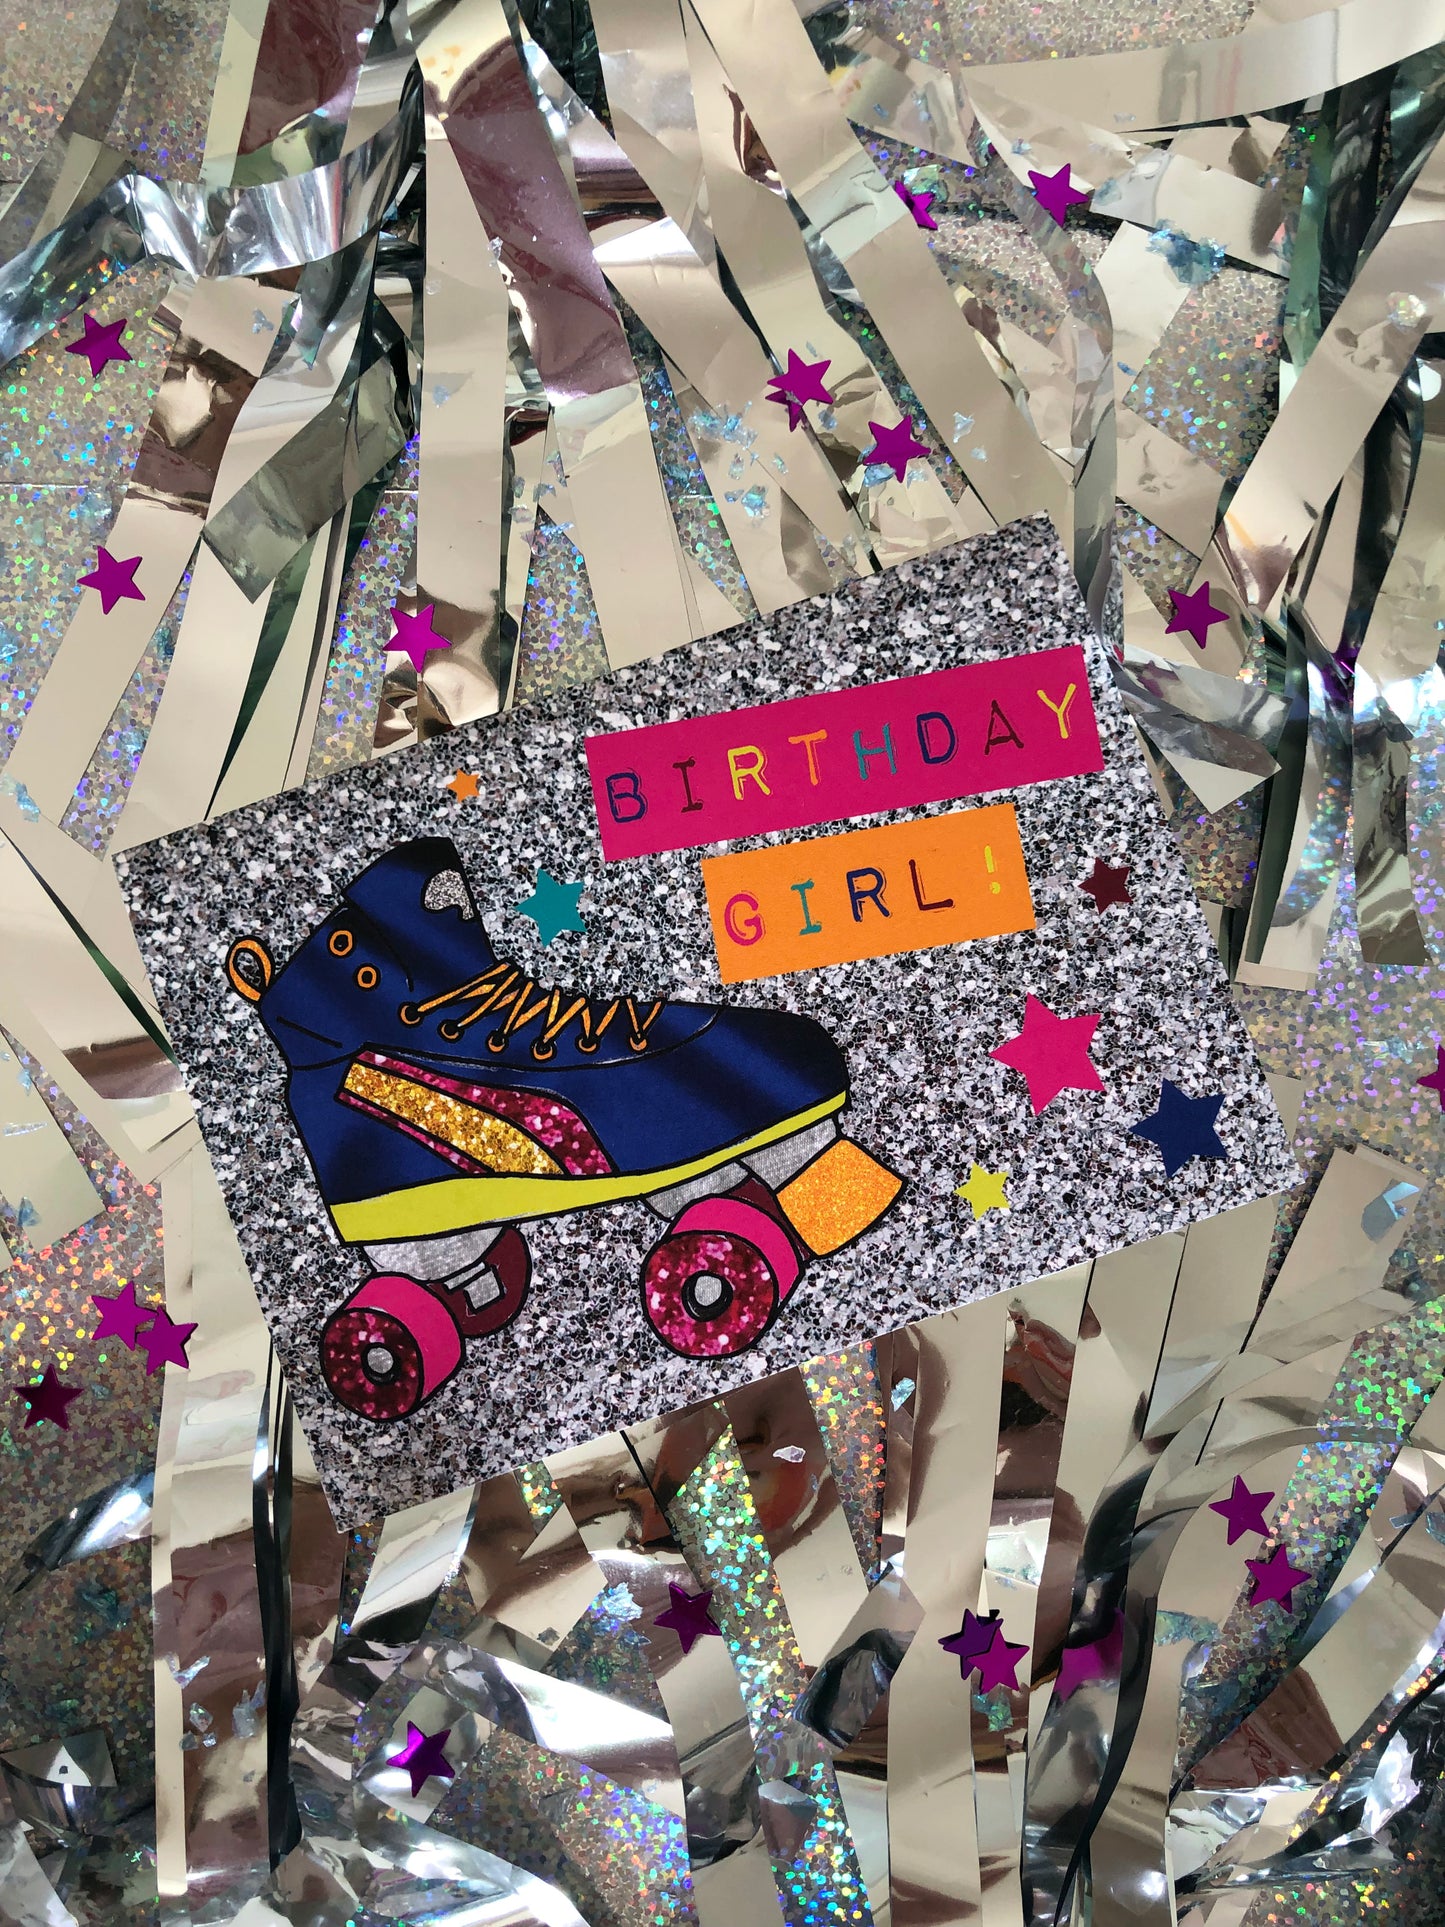 Neon and glitter rollerboot birthday girl card on a silver background.